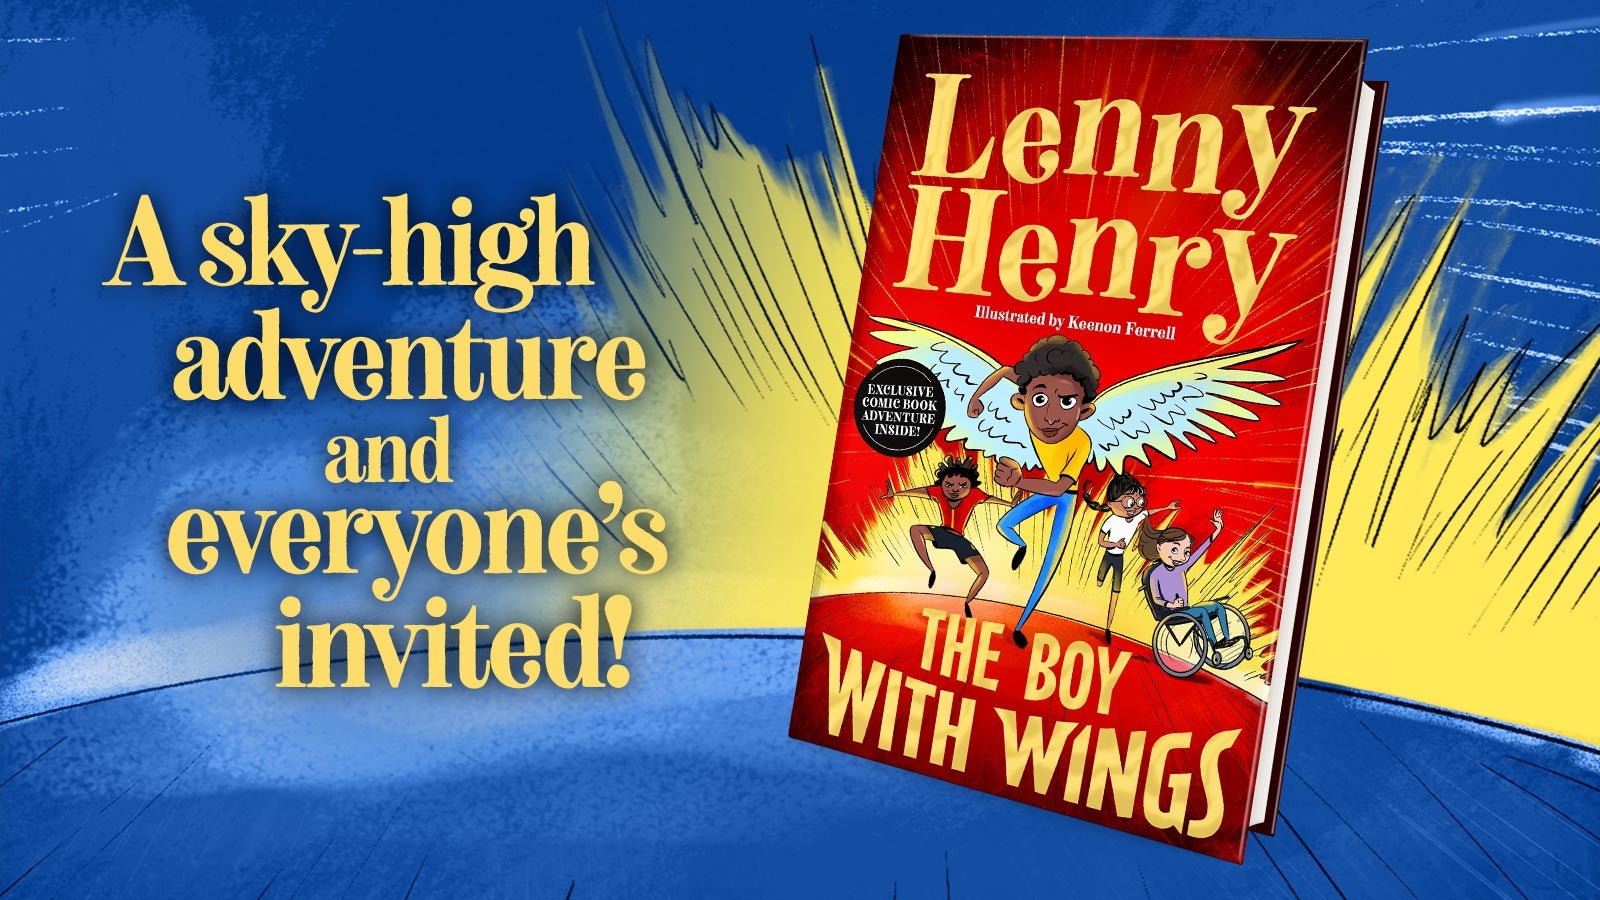 A picture of Lenny Henry's book The Boy with Wings